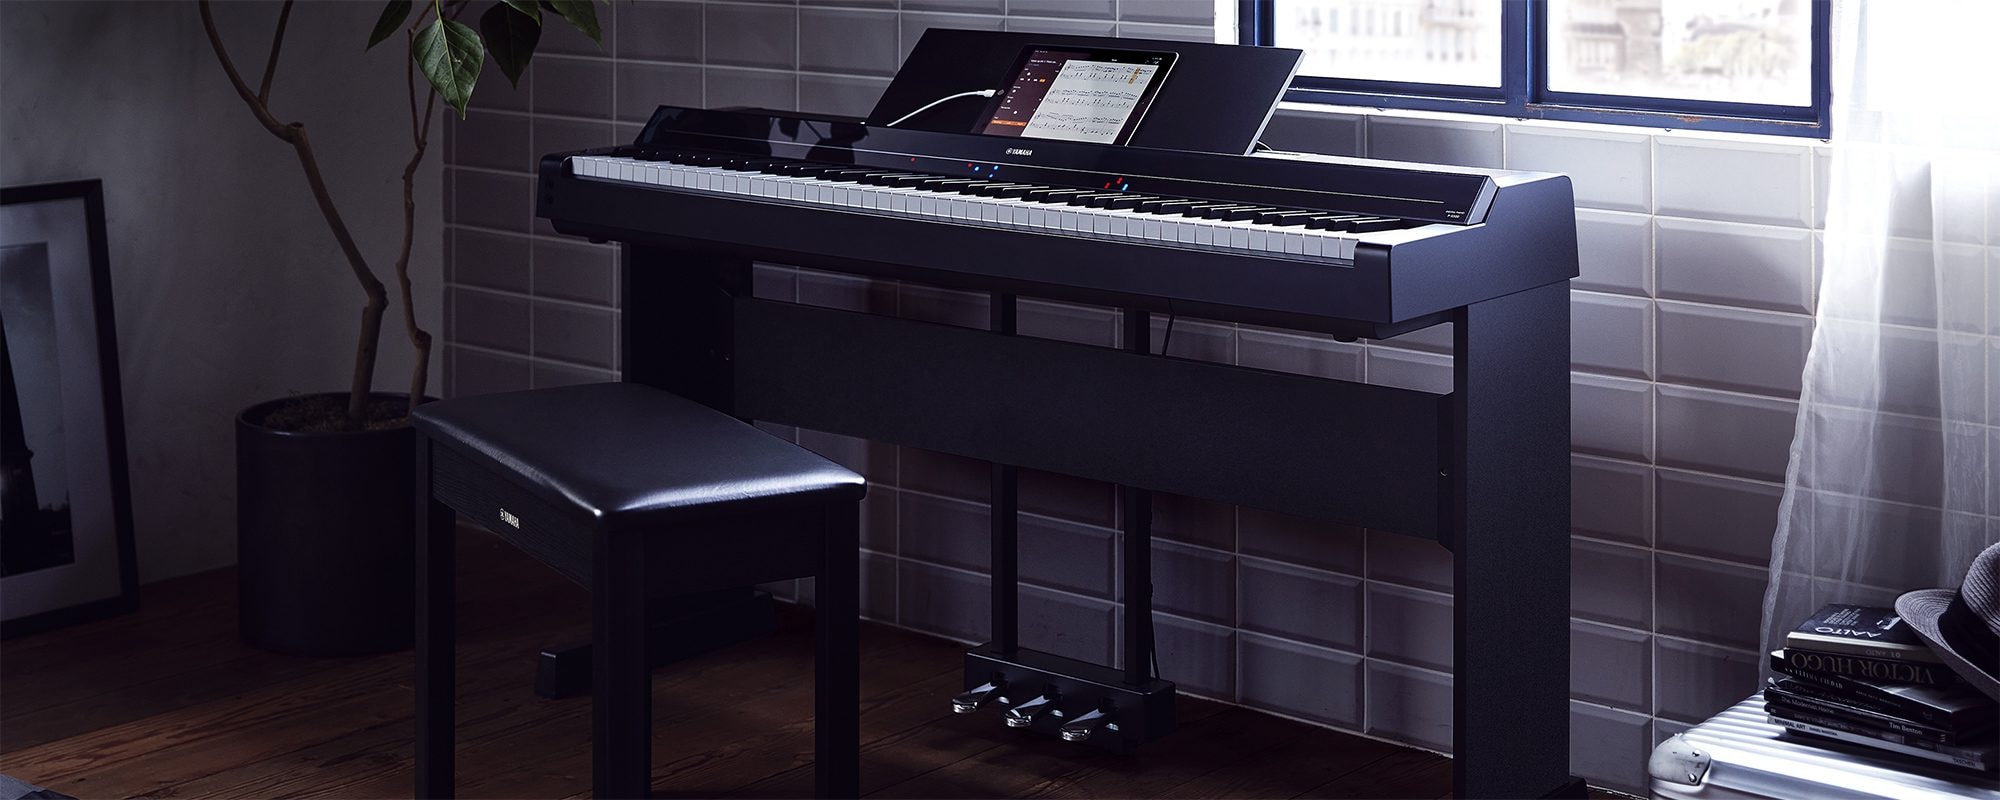 A Yamaha P-S500 Portable Digital Smart Piano in a room